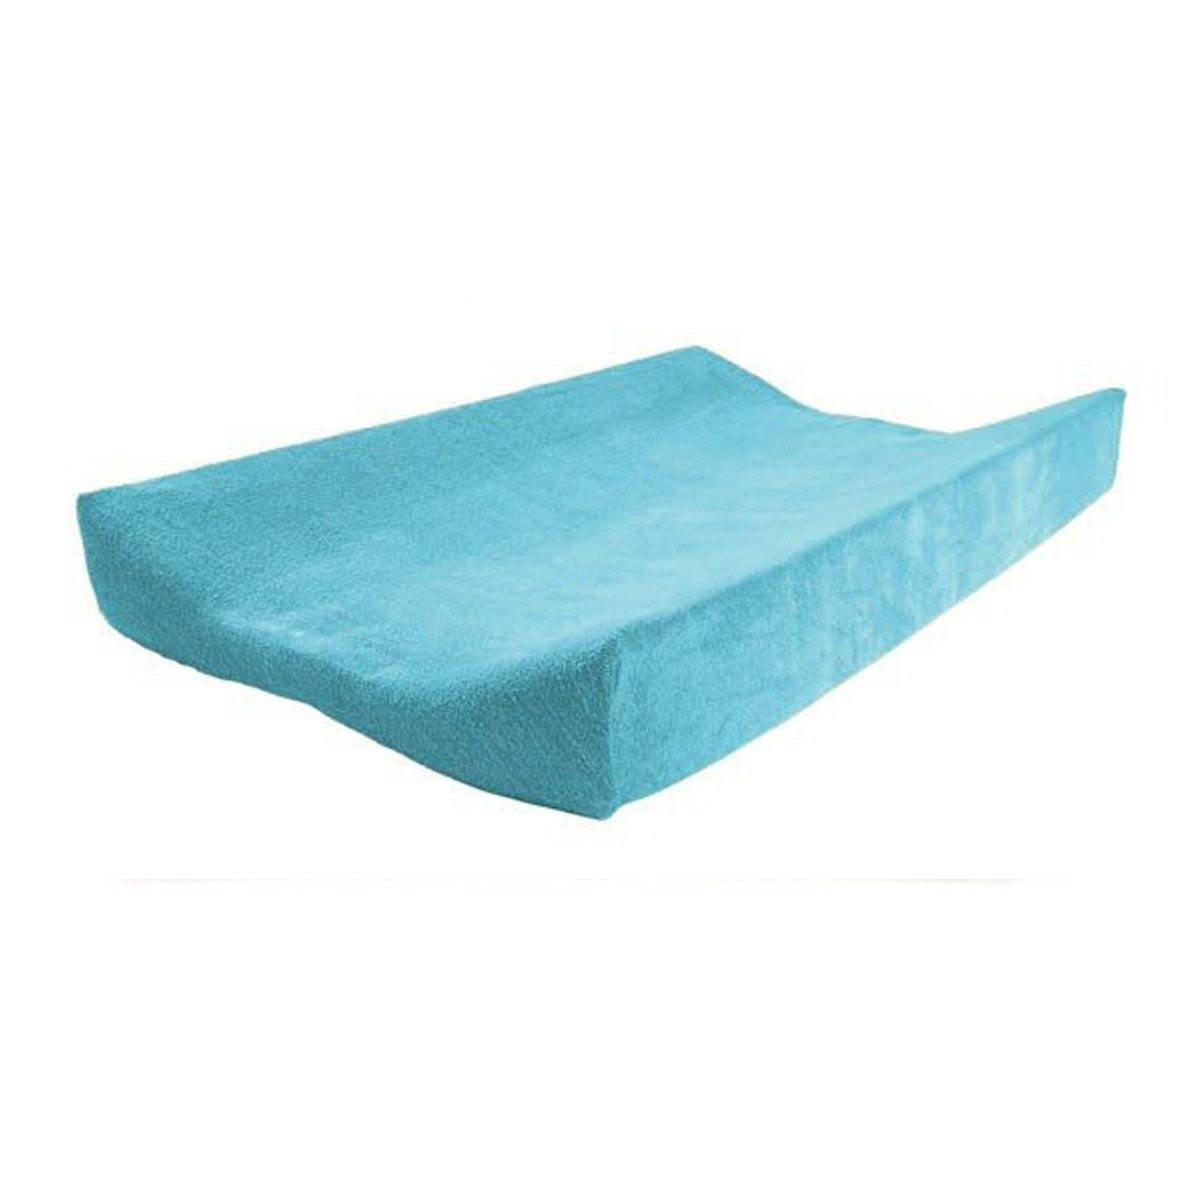 Deer Industries Baby accessories changing pad cover terry aqua blue. 